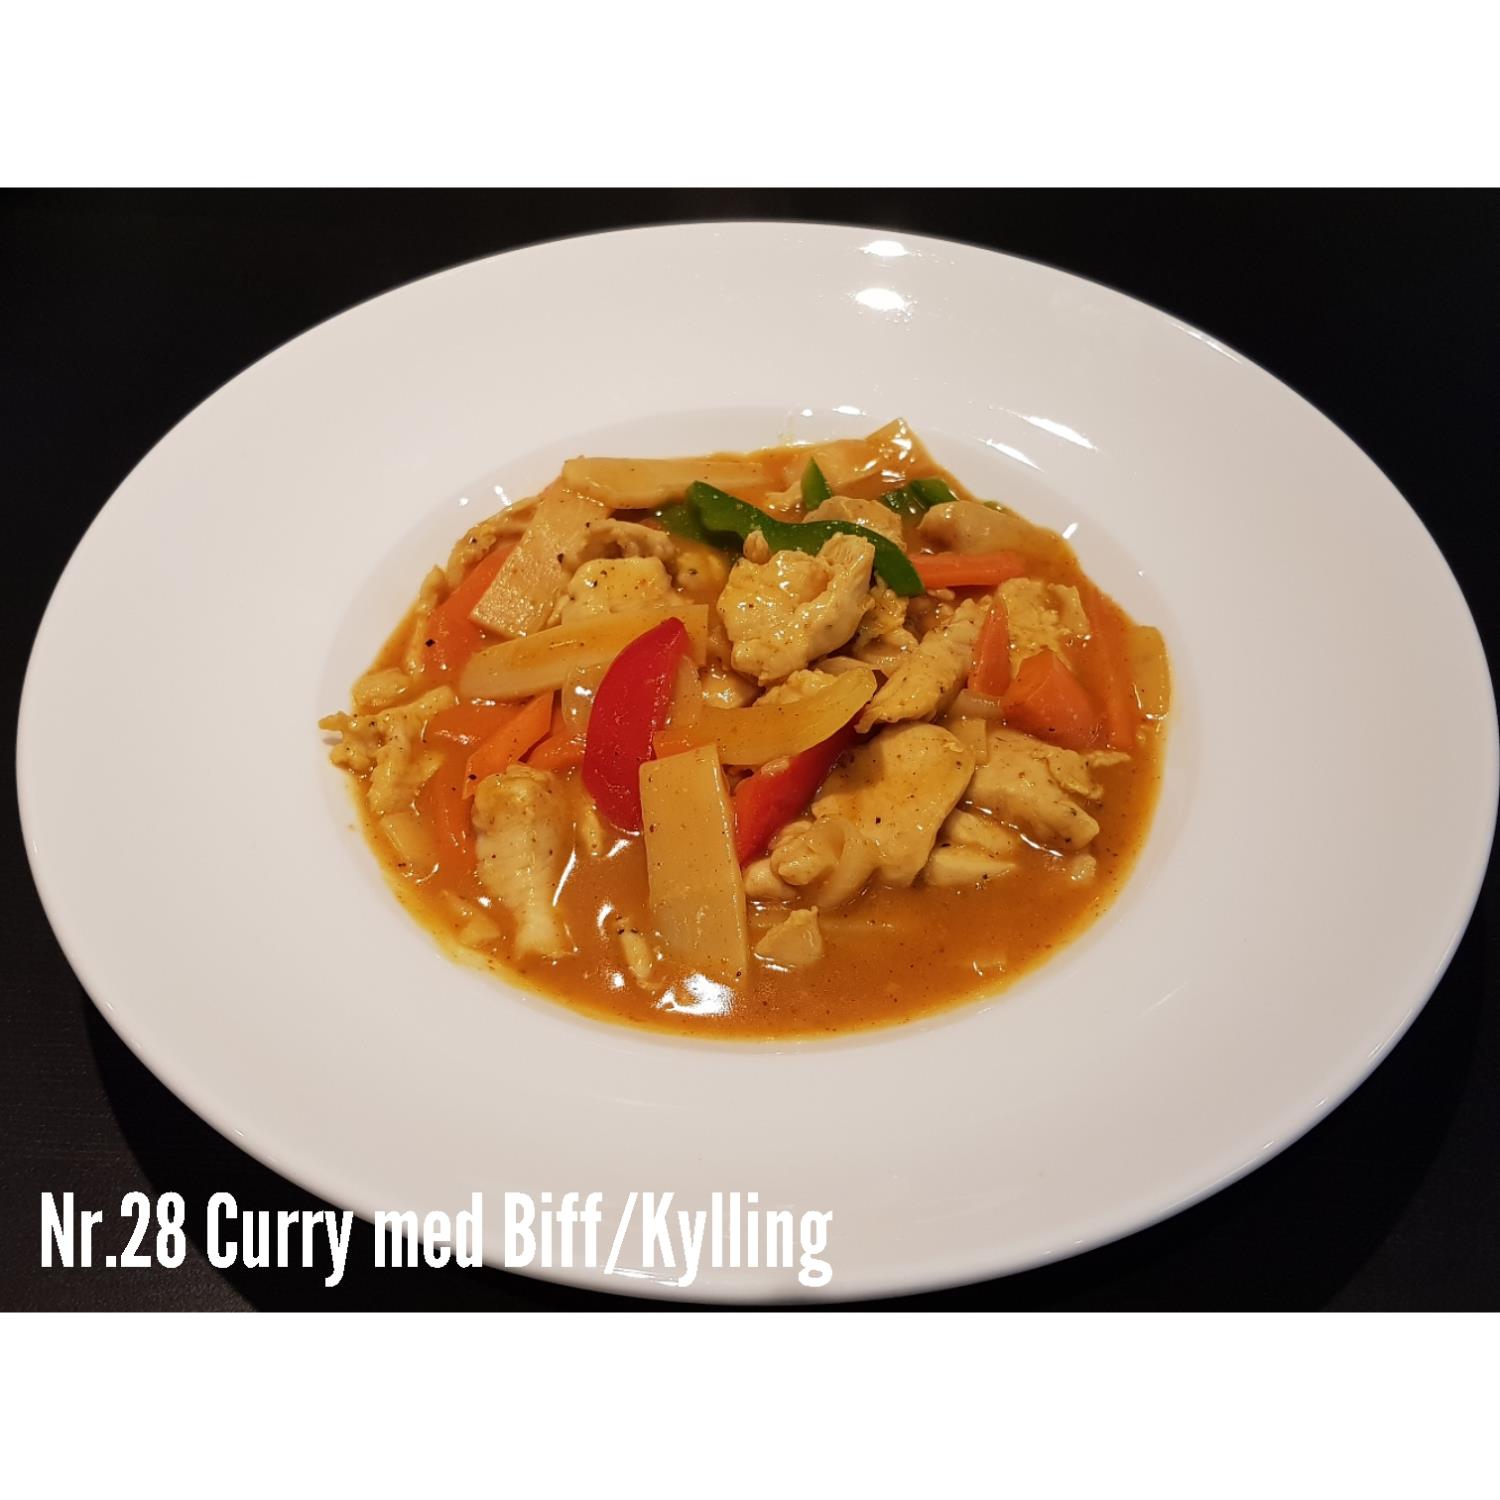 Nr. 28 Curry